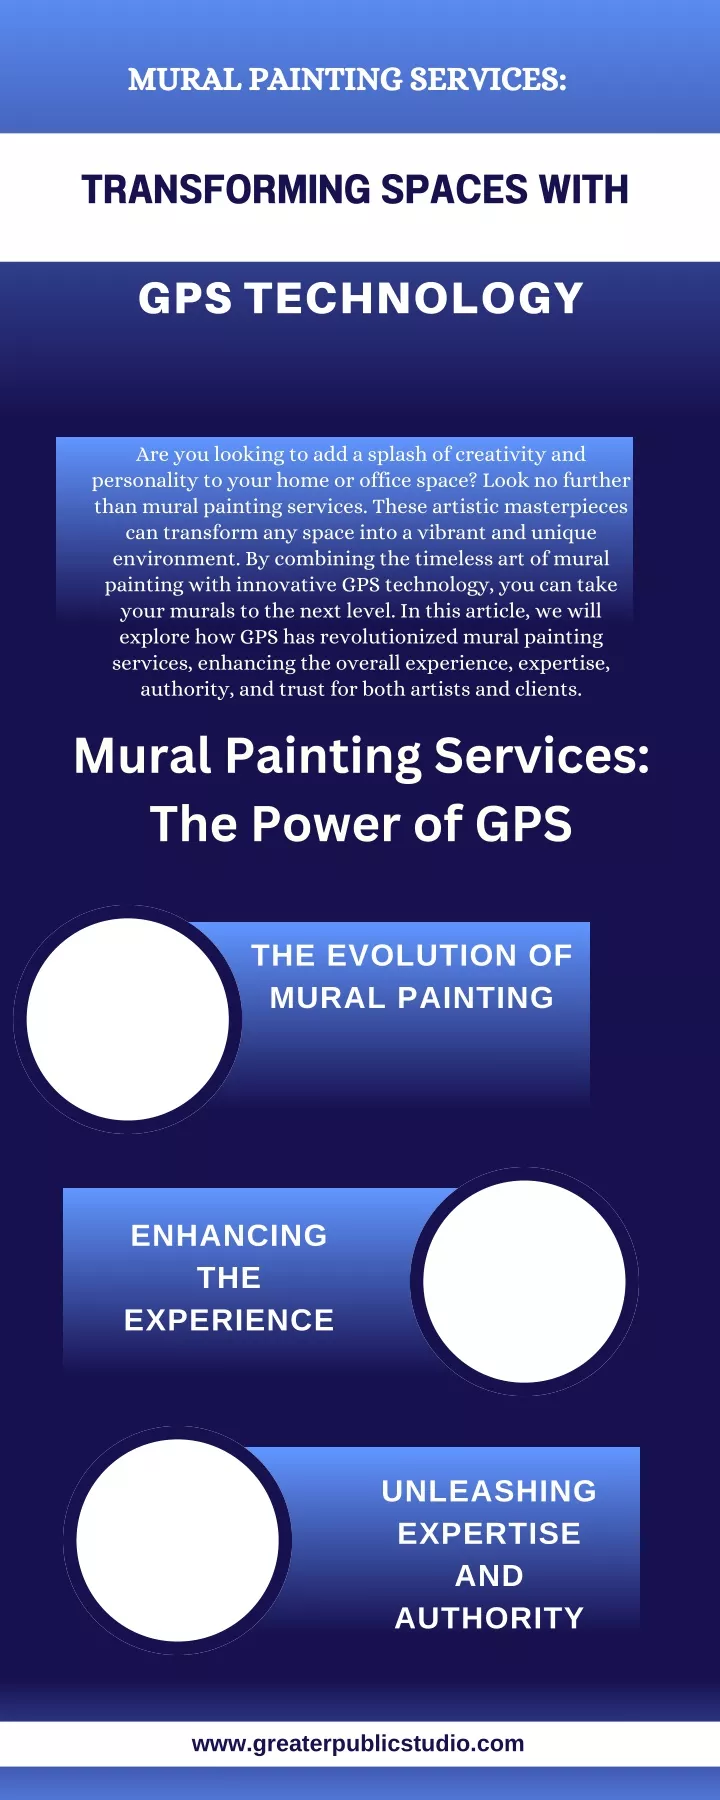 mural painting services